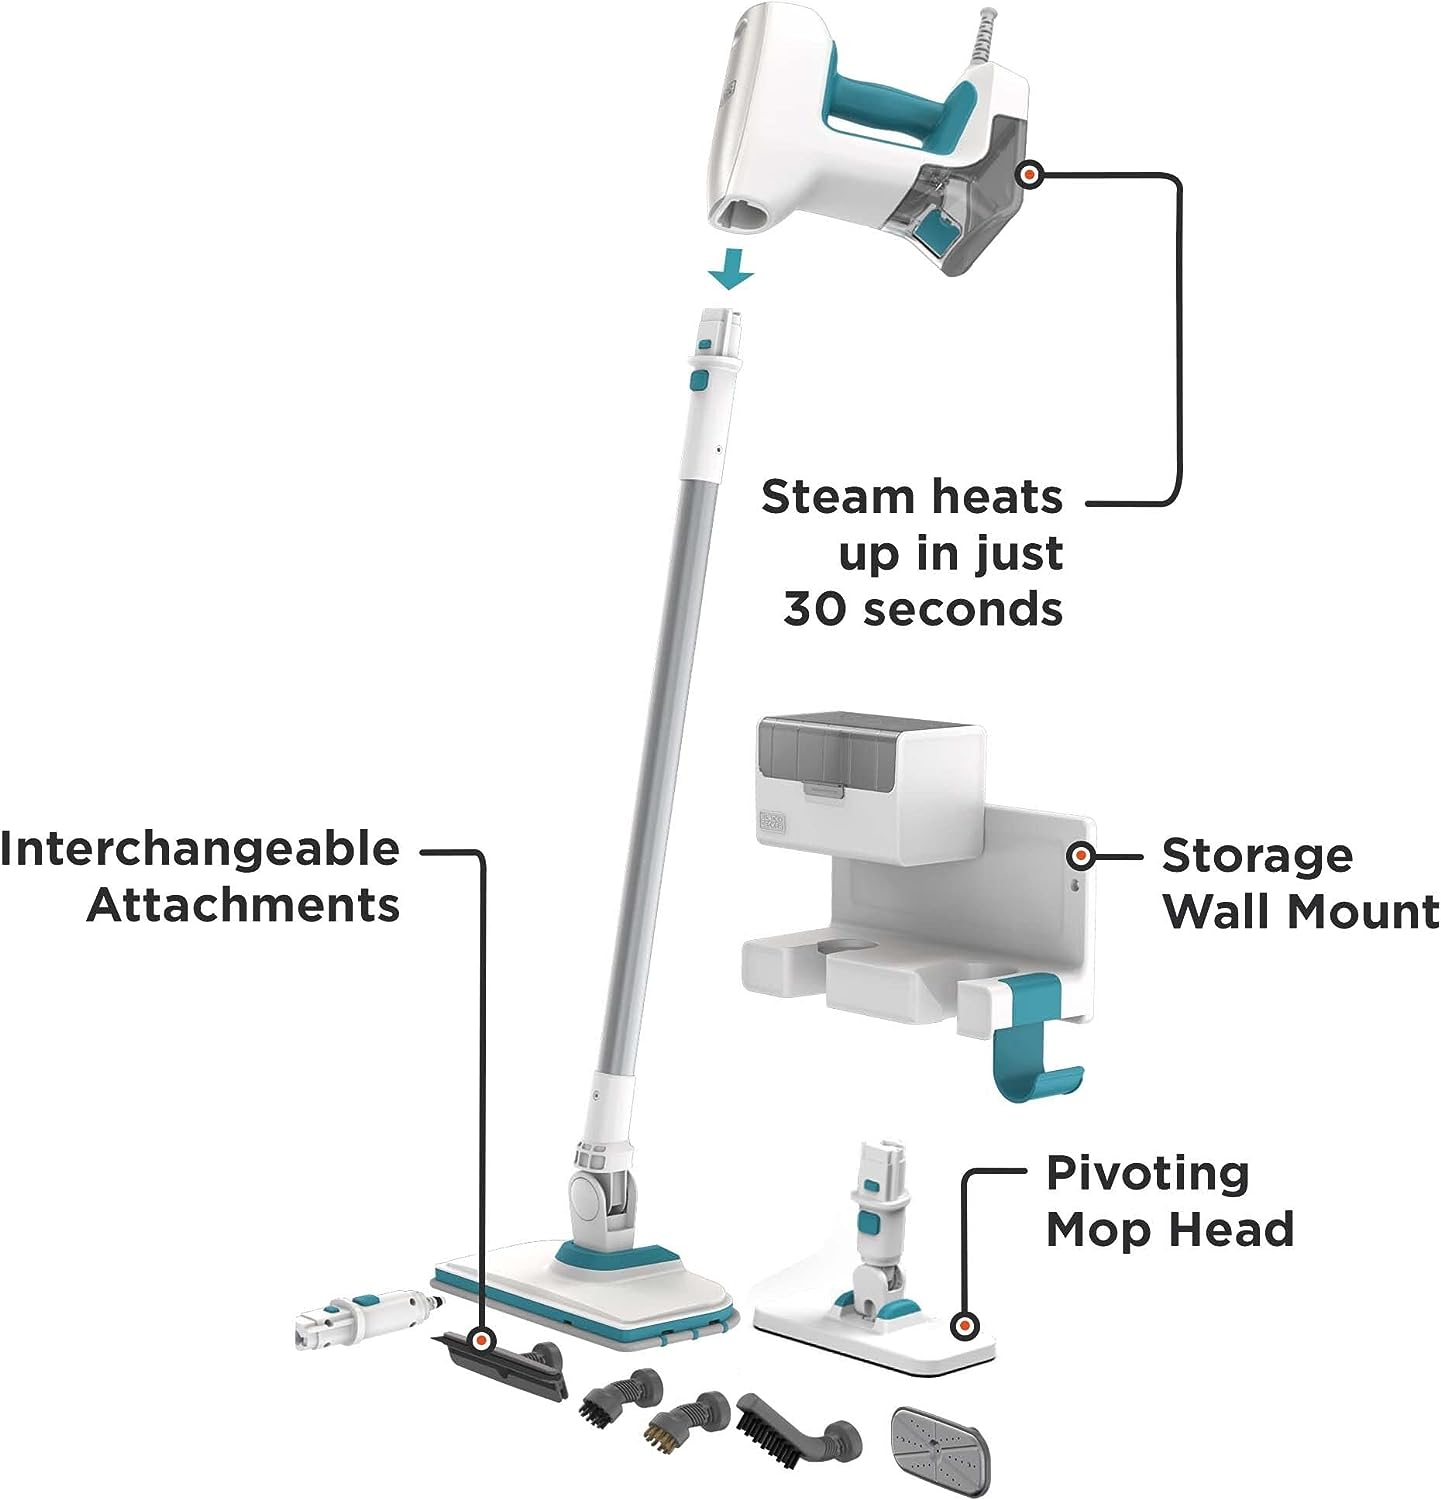 https://discounttoday.net/wp-content/uploads/2023/09/BLACKDECKER-Steamer-7-Attachments-for-Multipurpose-Cleaning-Includes-Storage-Wall-Mount-BHSM15FX10-2.jpg